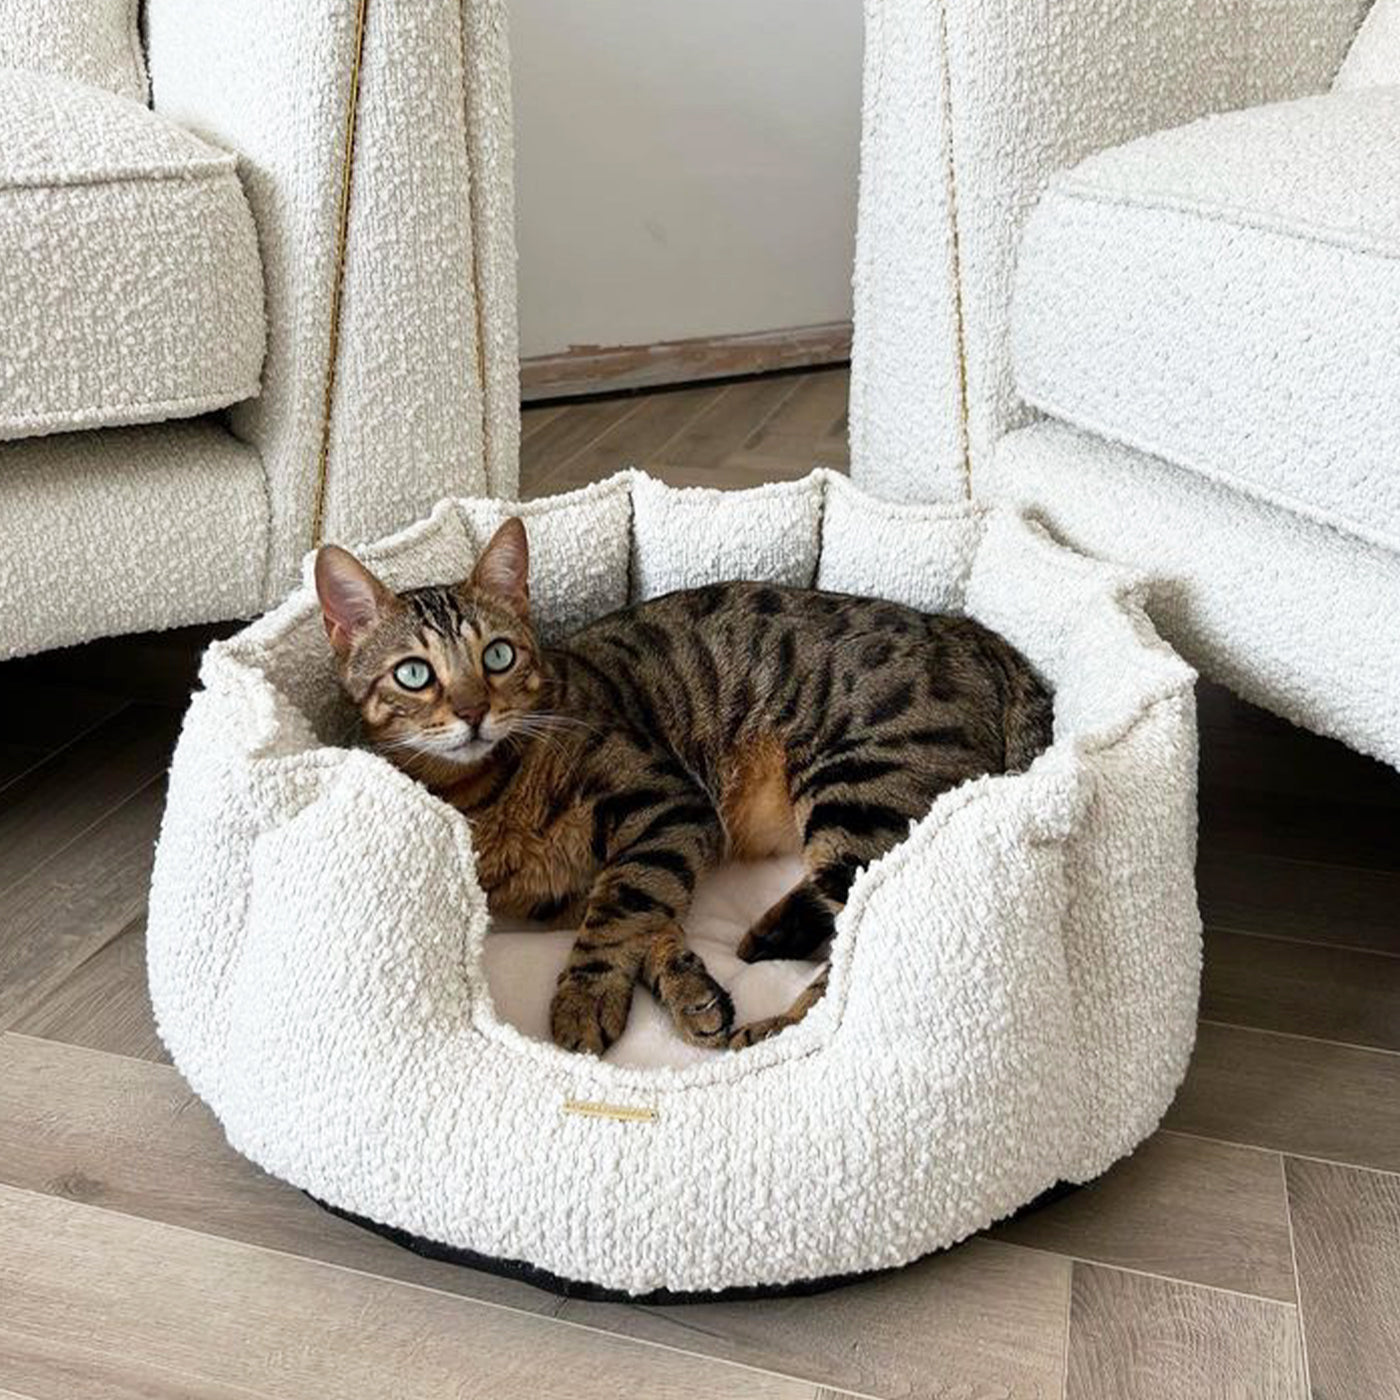 Discover Our Luxurious High Wall Bed For Cats & Kittens, Featuring inner pillow with plush teddy fleece on one side To Craft The Perfect Cat Bed In Stunning Ivory Boucle! Available To Personalize Now at Lords & Labradors US